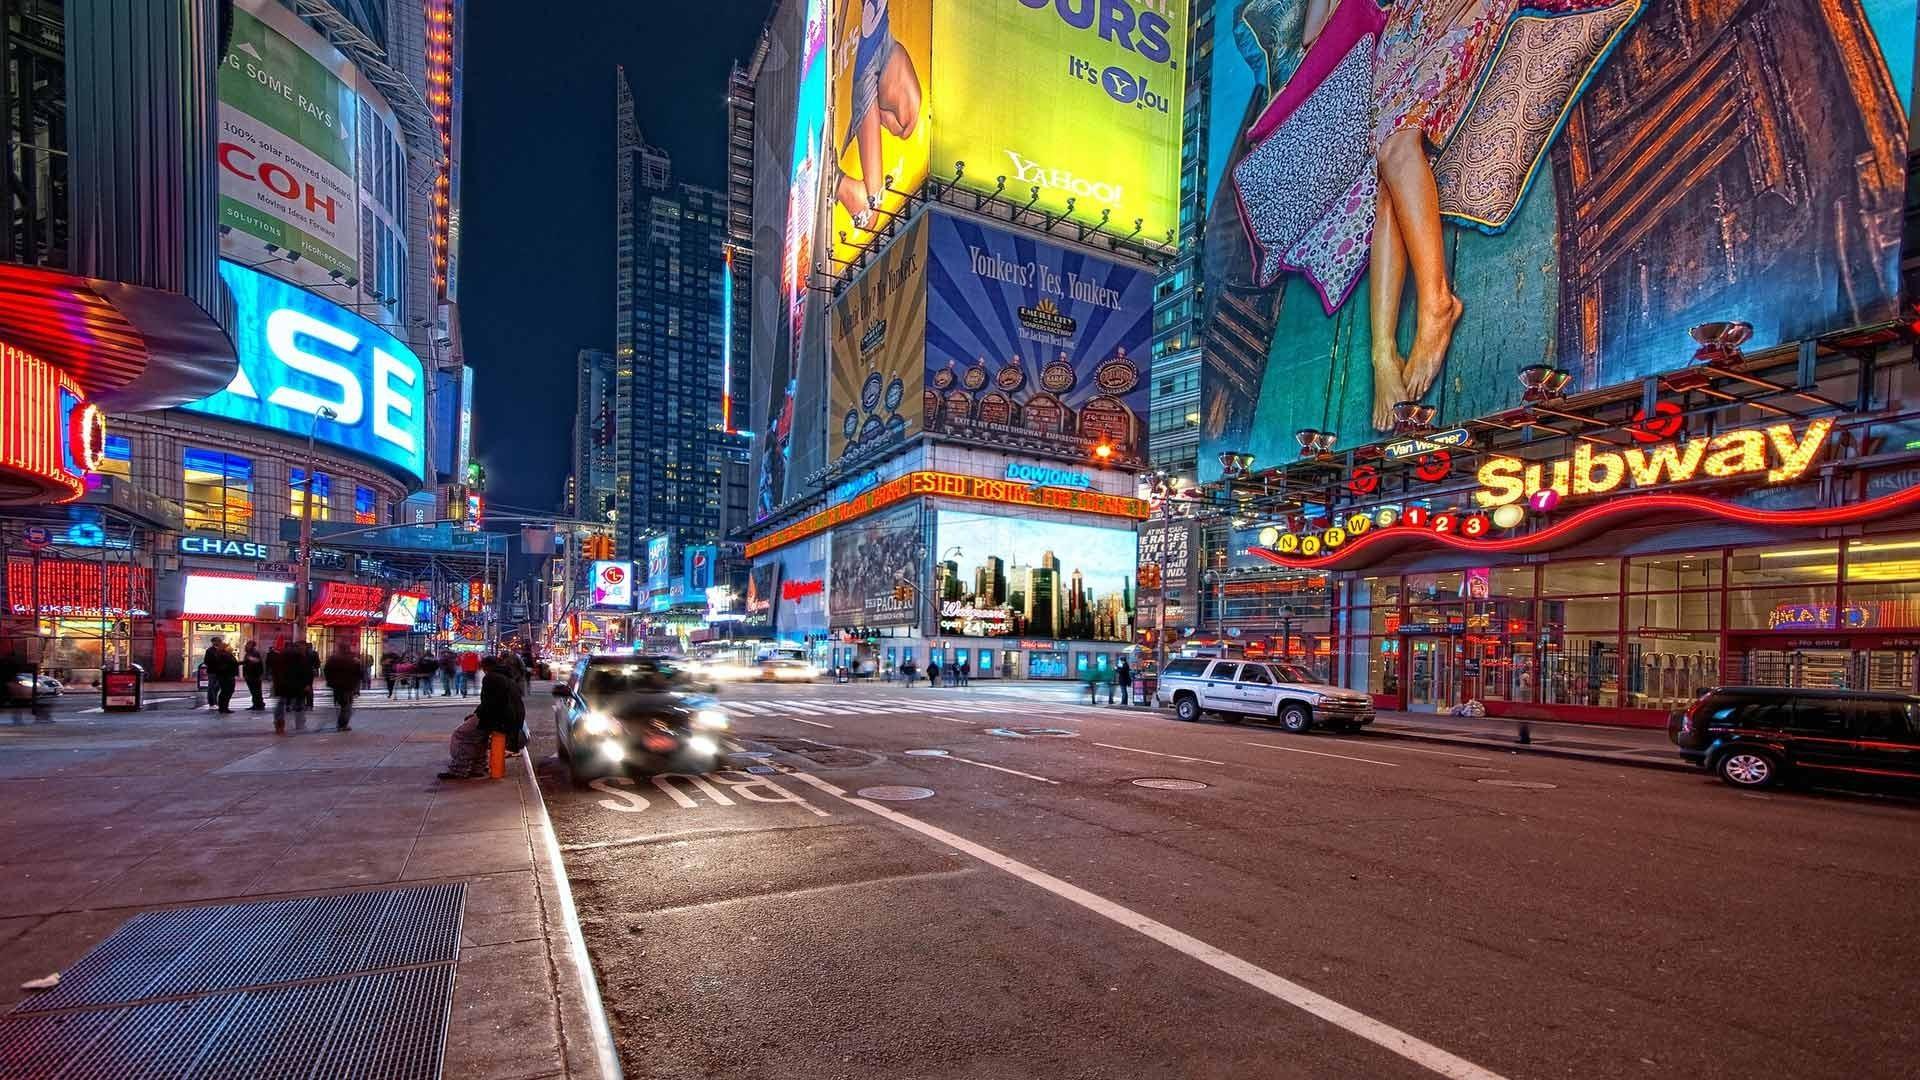 Times square late at night wallpaper. PC